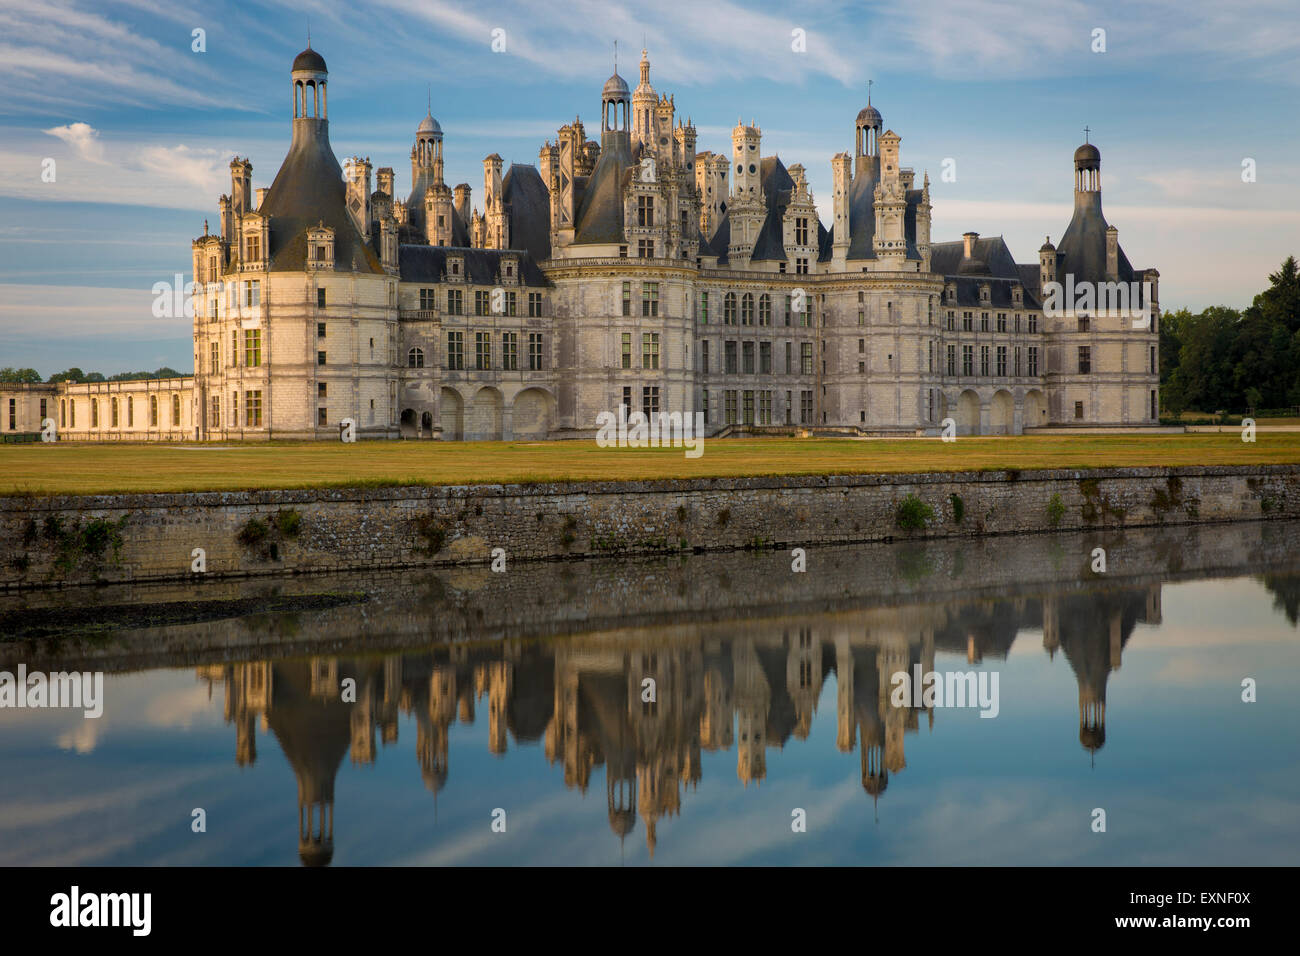 Dawn over Chateau de Chambord - originally built as a hunting lodge for King Francis I, Loire-et-Cher, Centre, France Stock Photo